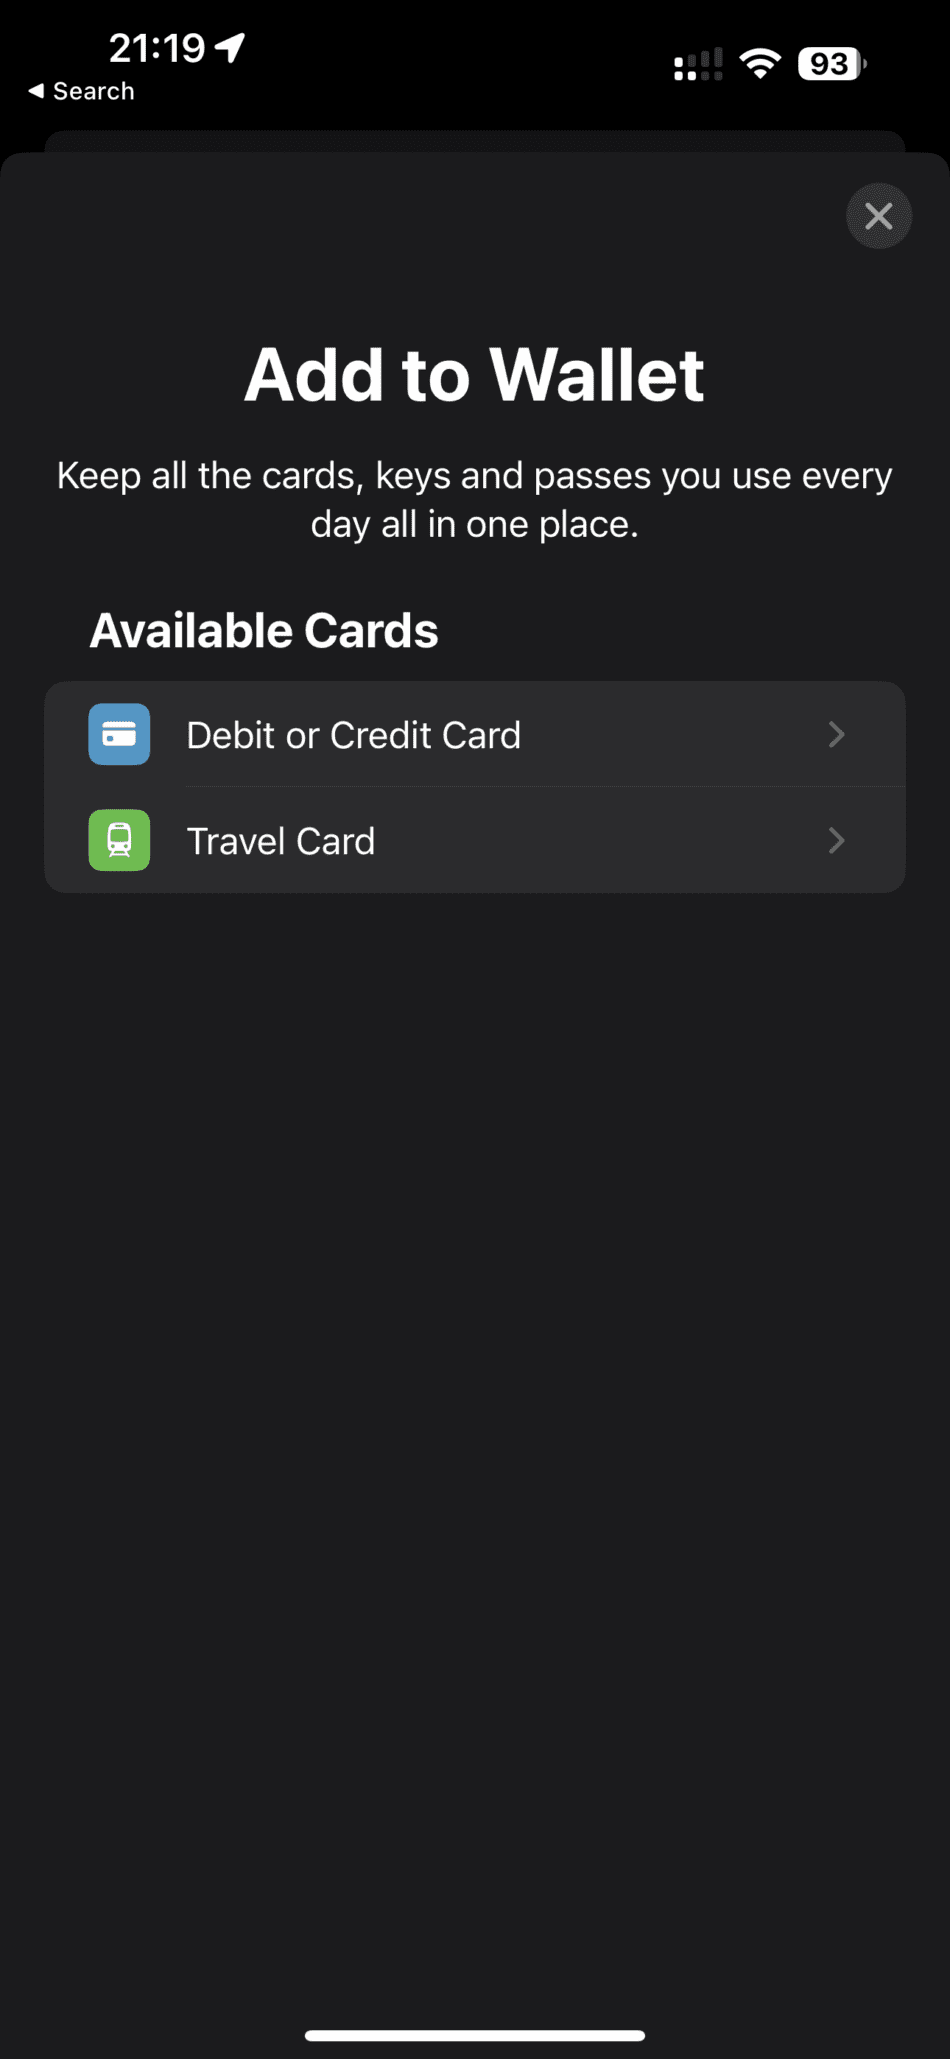 How to set up and use Suica on iPhone for cashless payment in Japan